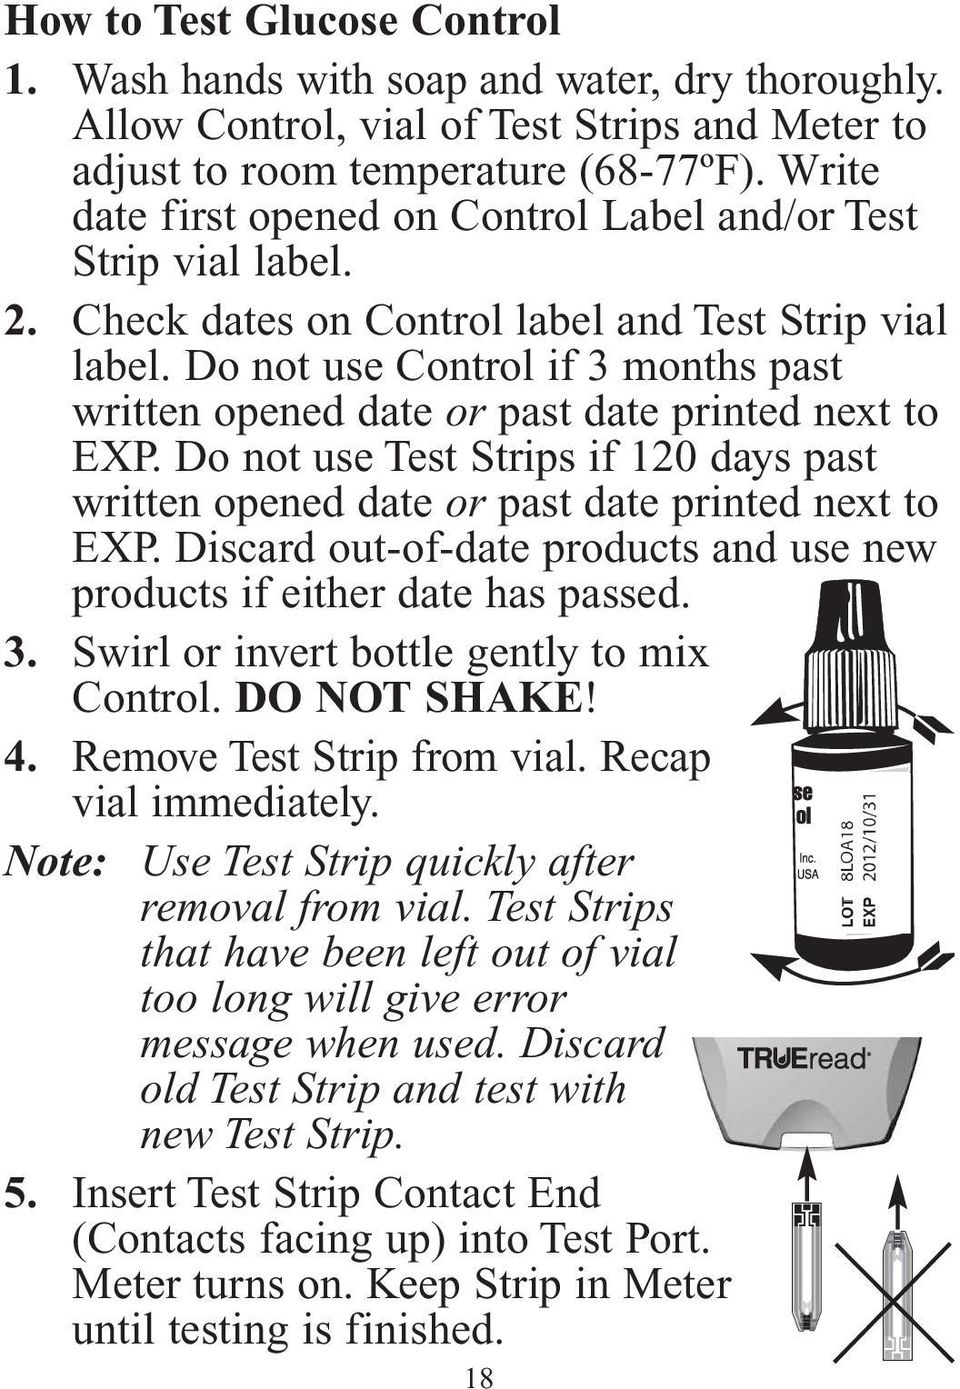 Do not use Control if 3 months past written opened date or past date printed next to EXP. Do not use Test Strips if 120 days past written opened date or past date printed next to EXP.